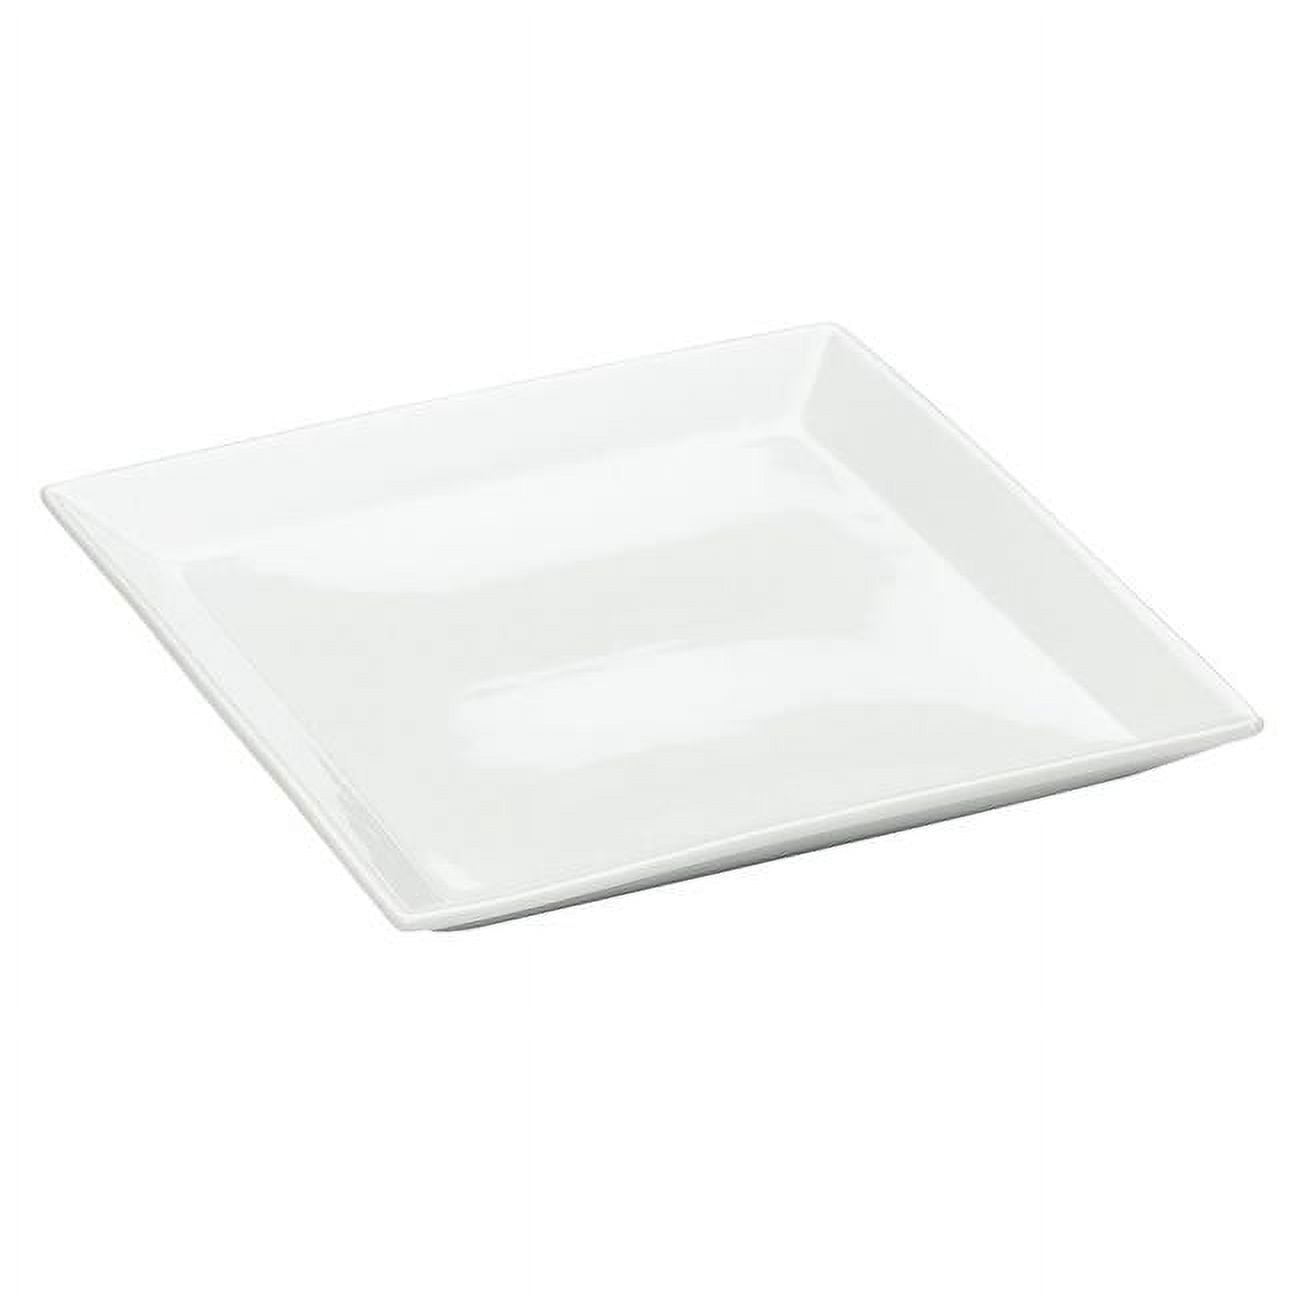 Pp252 Square Gourmet Display Platter - Bright White Porcelain - 11.875 X 11.875 X 1.25 In.